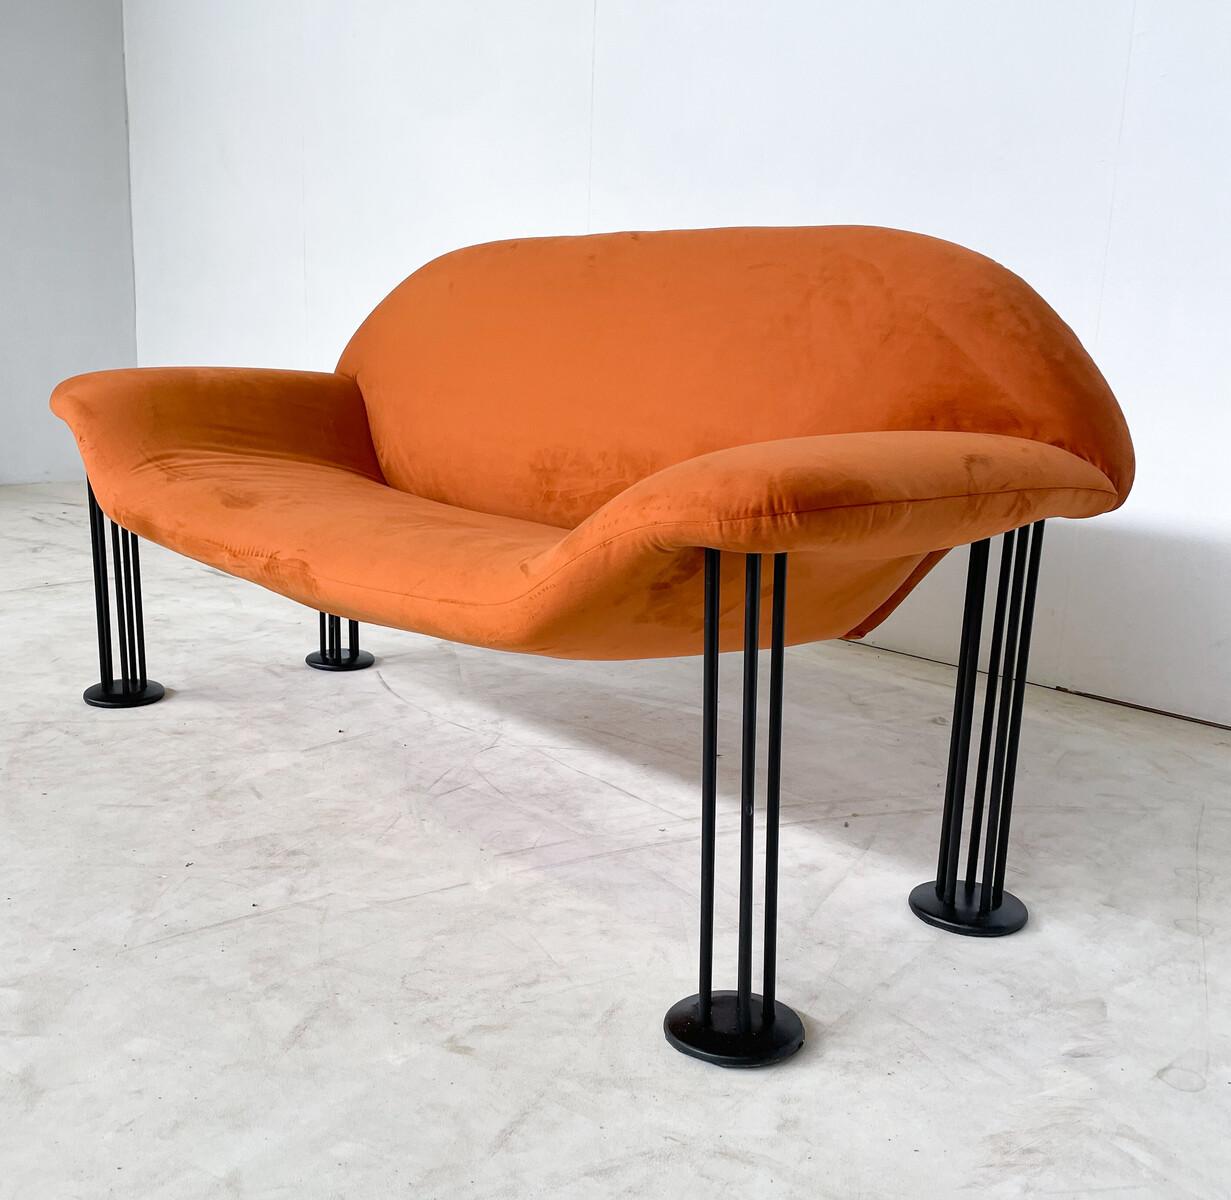 Mid-Century Modern Orange Sofa by Burkhard Vogtherr for Hain + Tohme In Good Condition For Sale In Brussels, BE